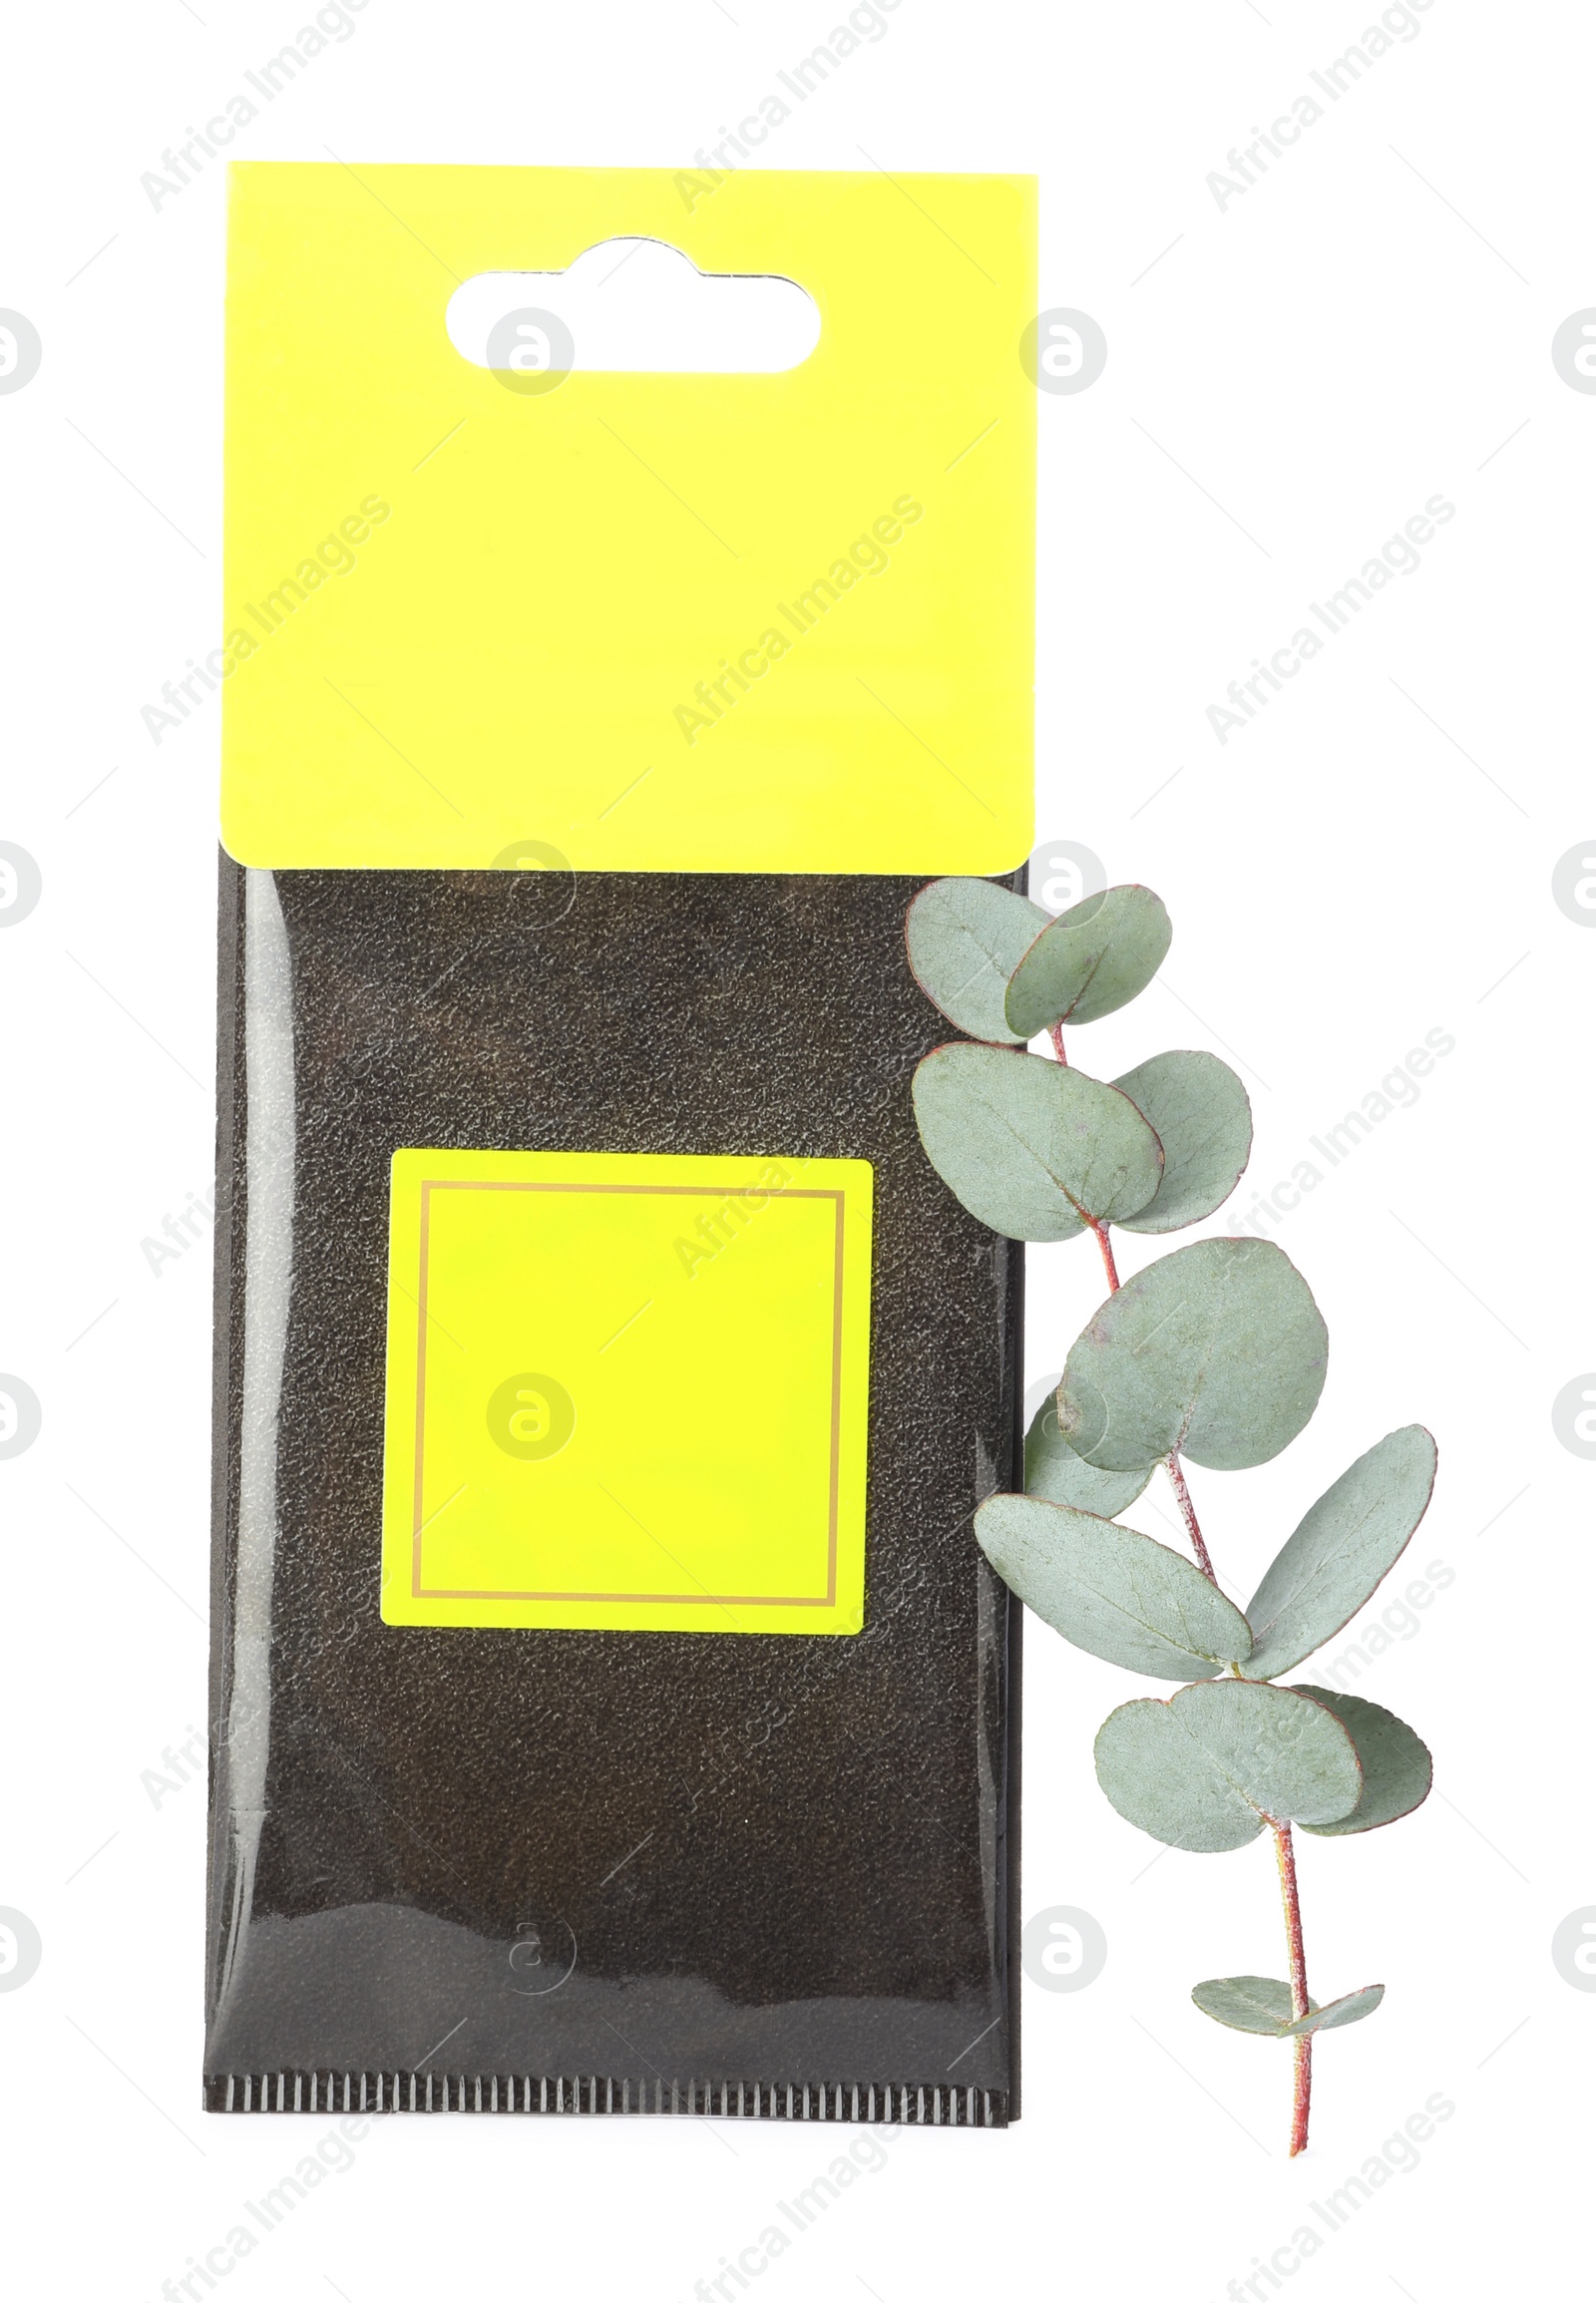 Photo of Scented sachet and eucalyptus branch on white background